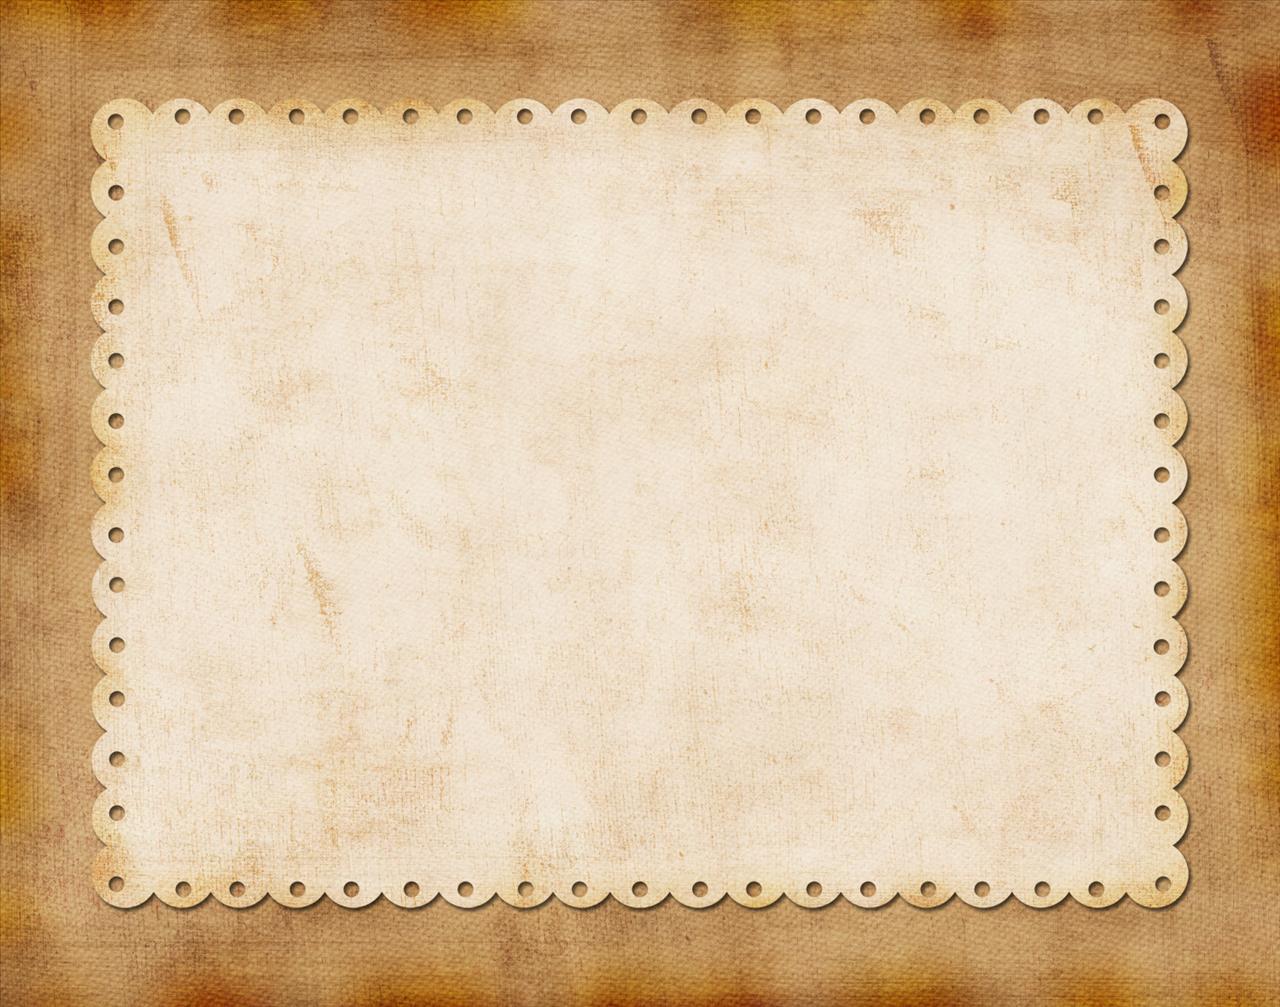 Ivory on Tan border Backgrounds